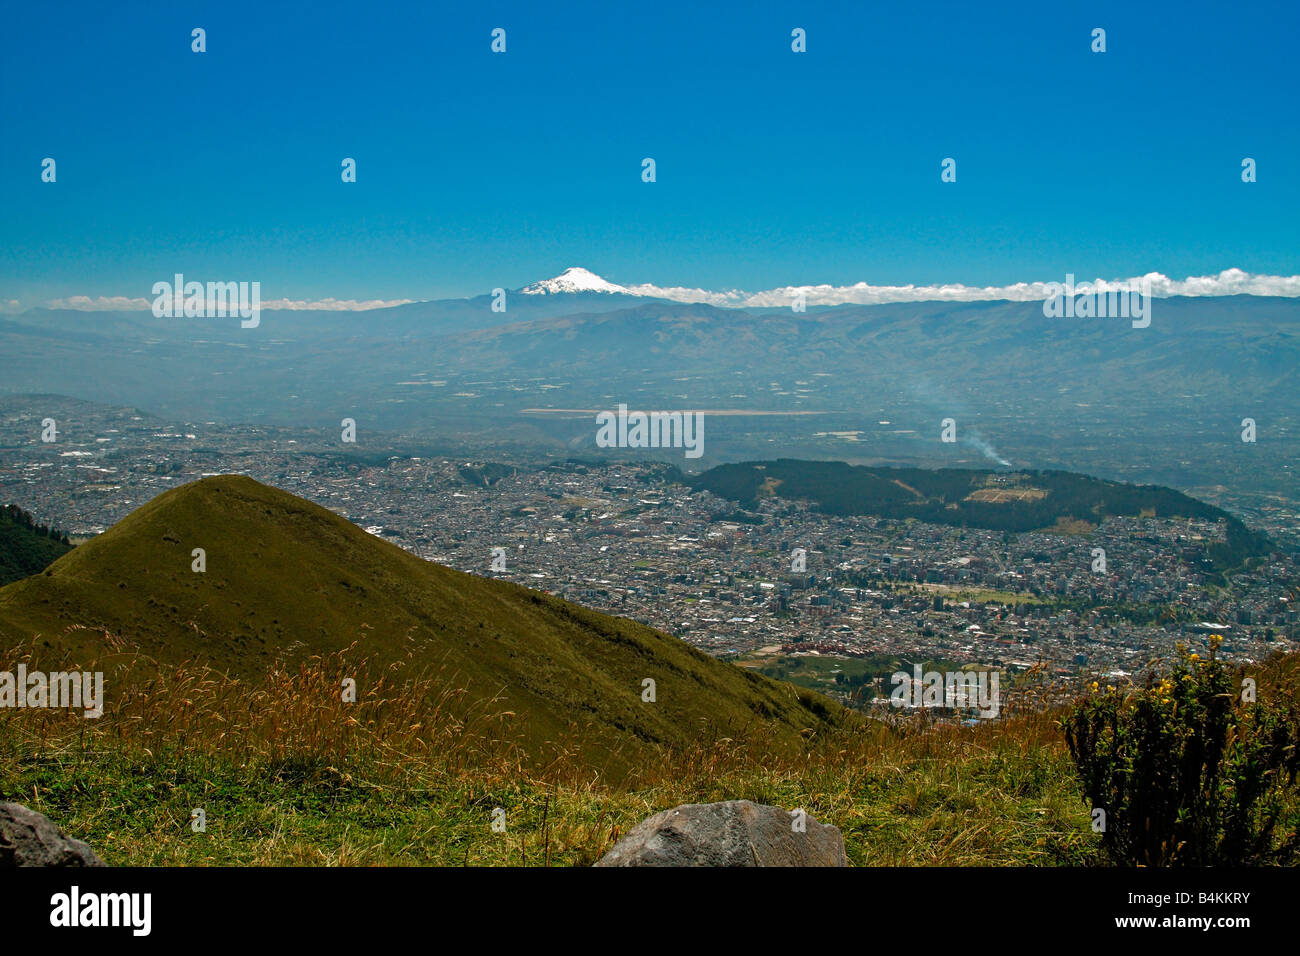 View of Cayambe volcano, Quito, and site of new Quito airport, from summit of Pichincha volcano, Quito, Ecuador. Stock Photo